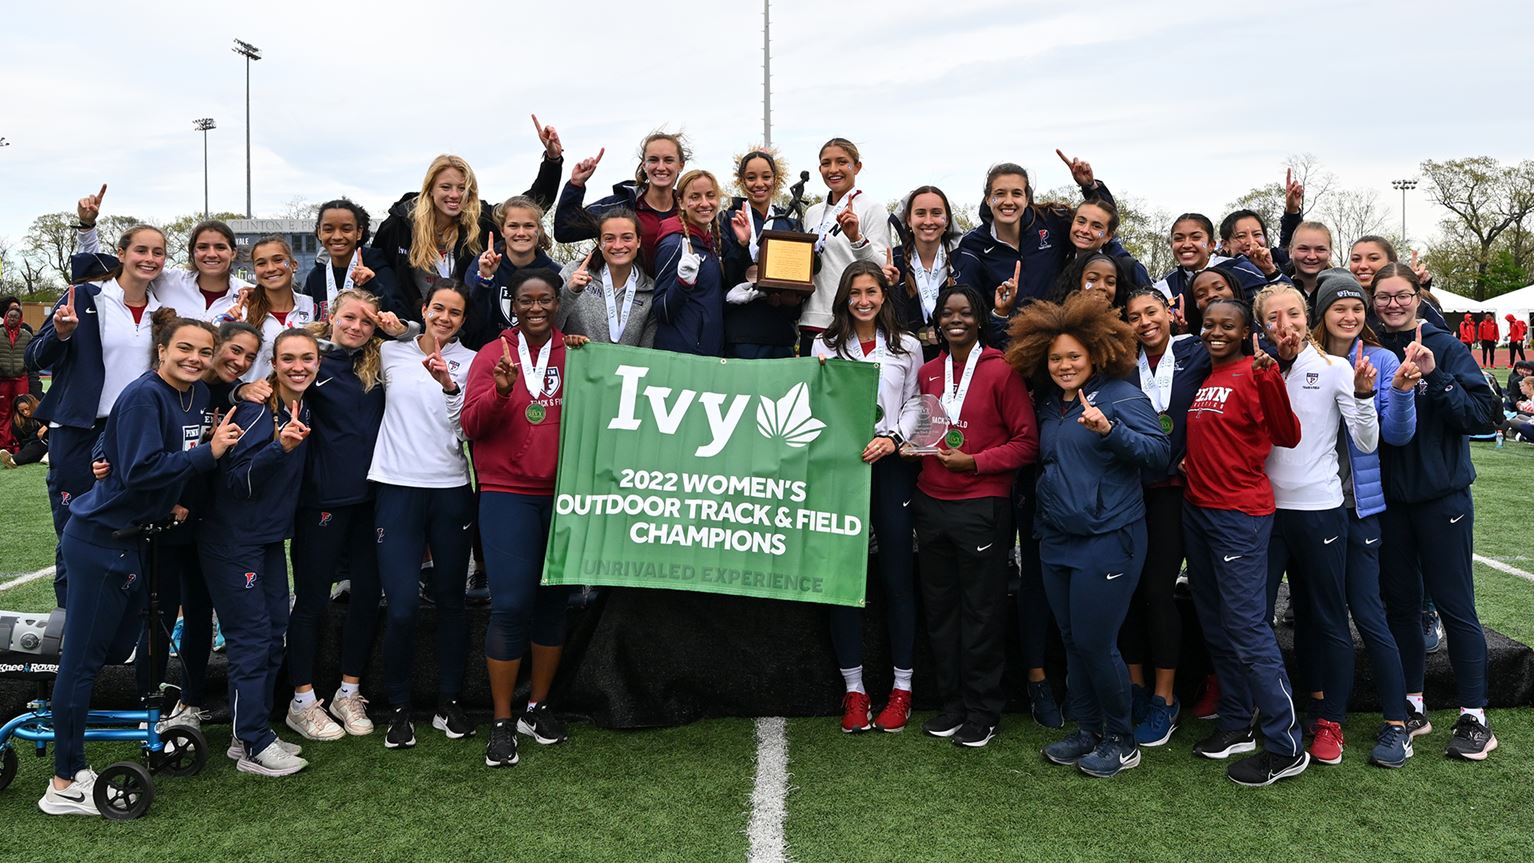 The women's track and field team celebrates with the championship banner.